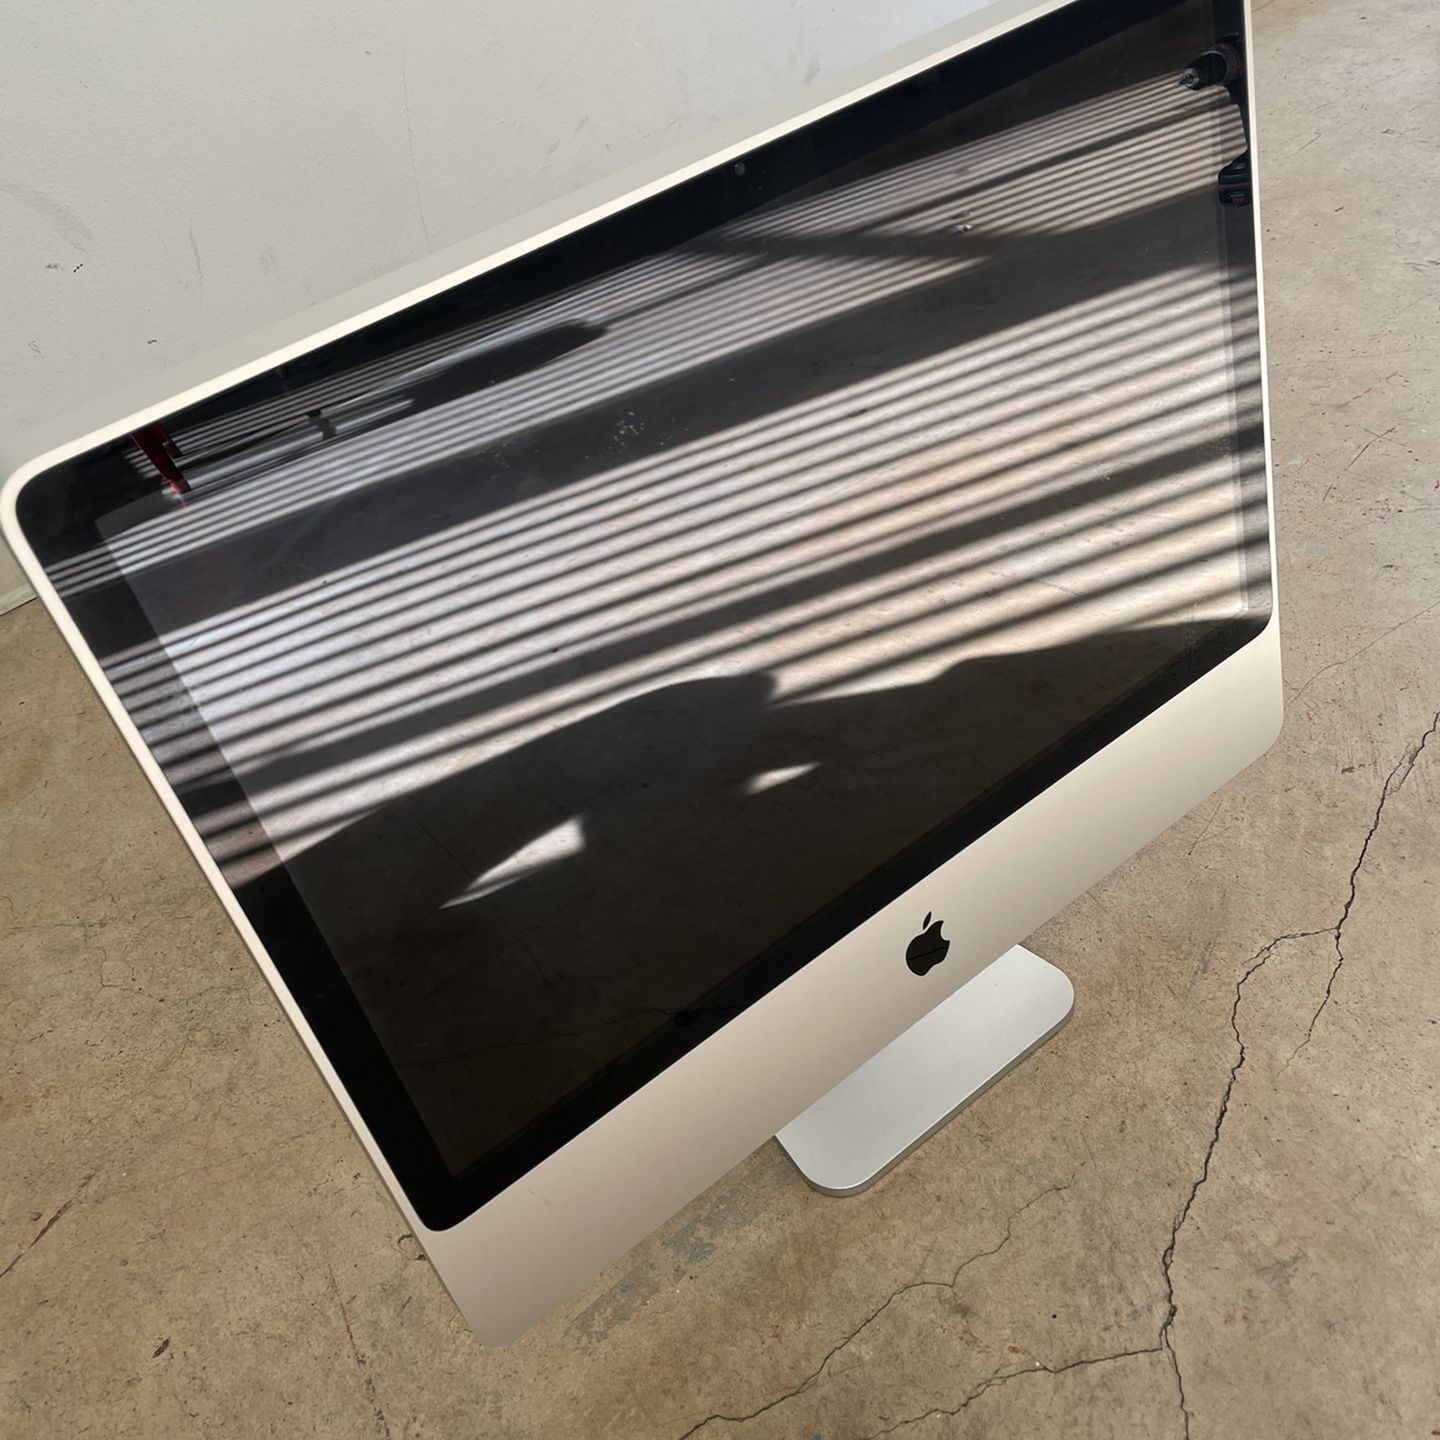 Apple iMac 24” 2009 Compute For Parts. No Power Supply, No HDD. 